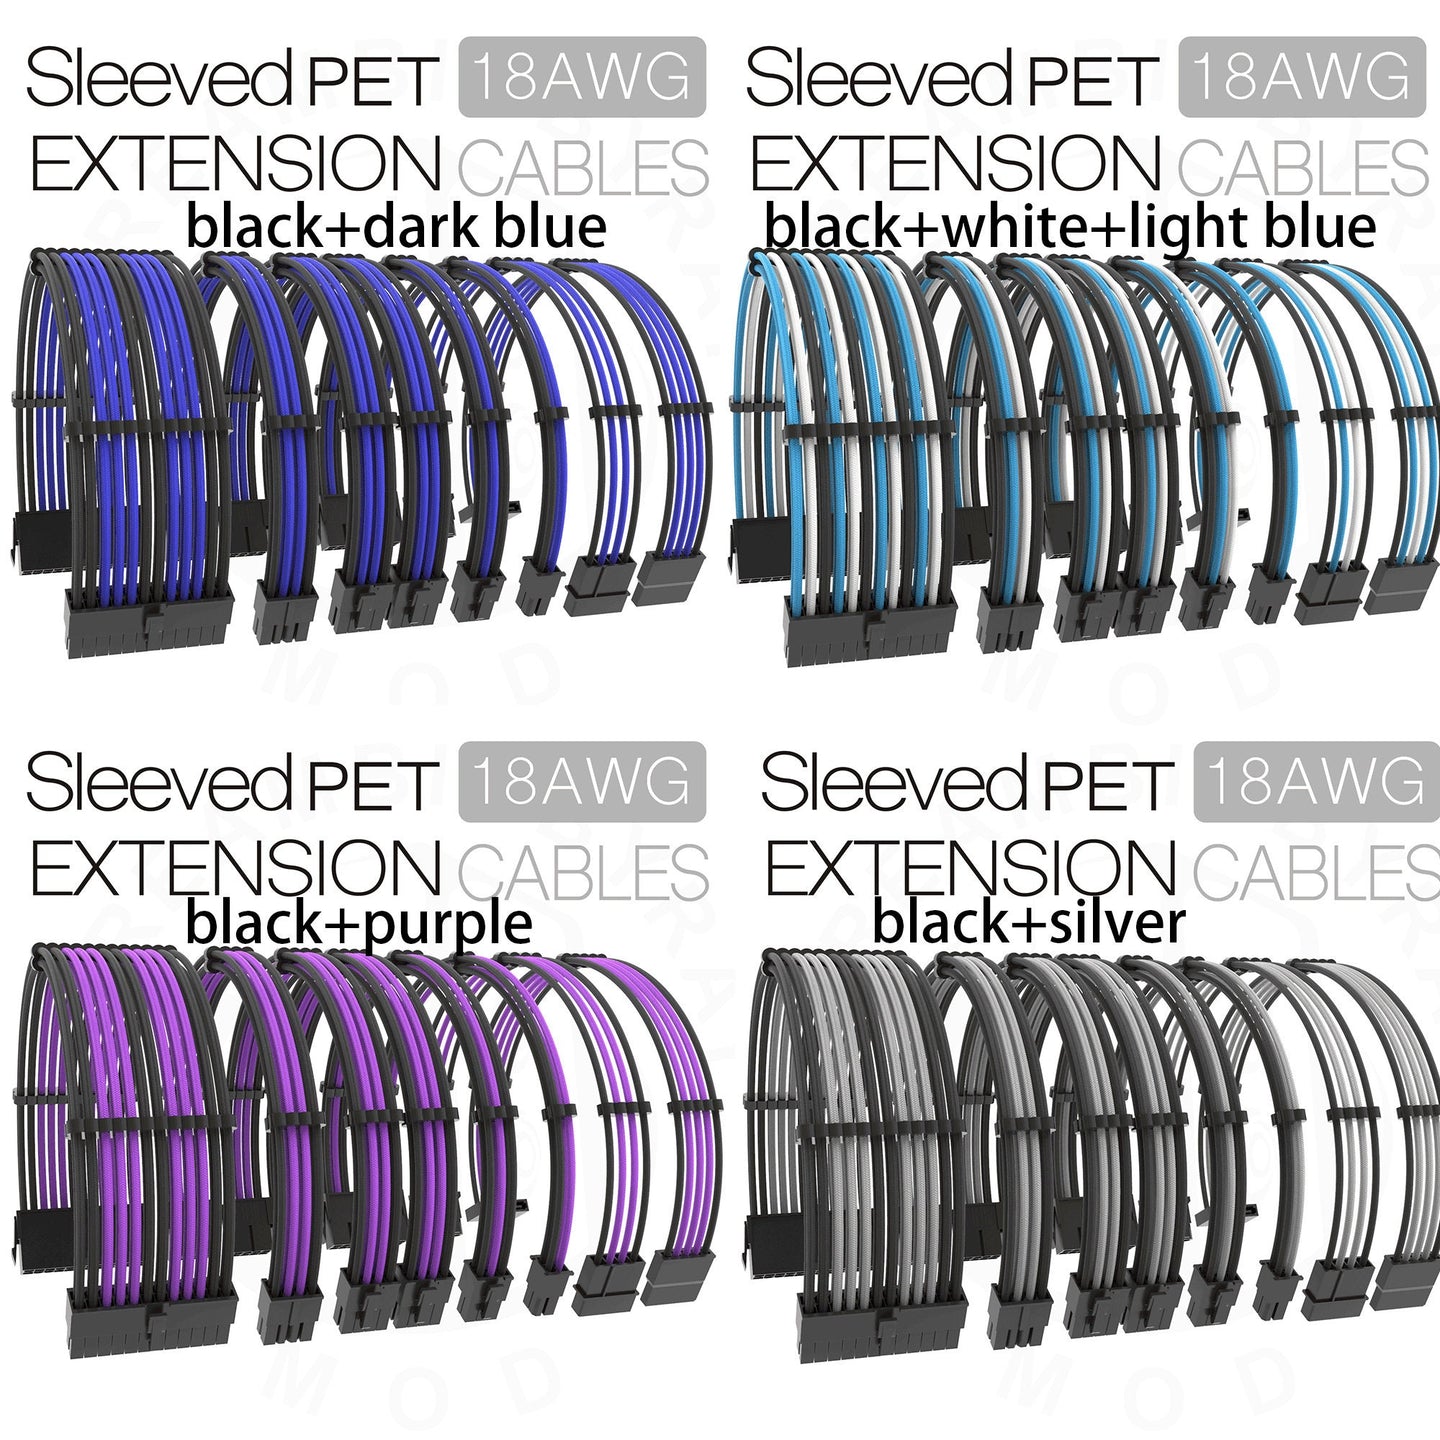 18awg sleeved pet mixed colors psu extension cables kit atx eps pcie cords